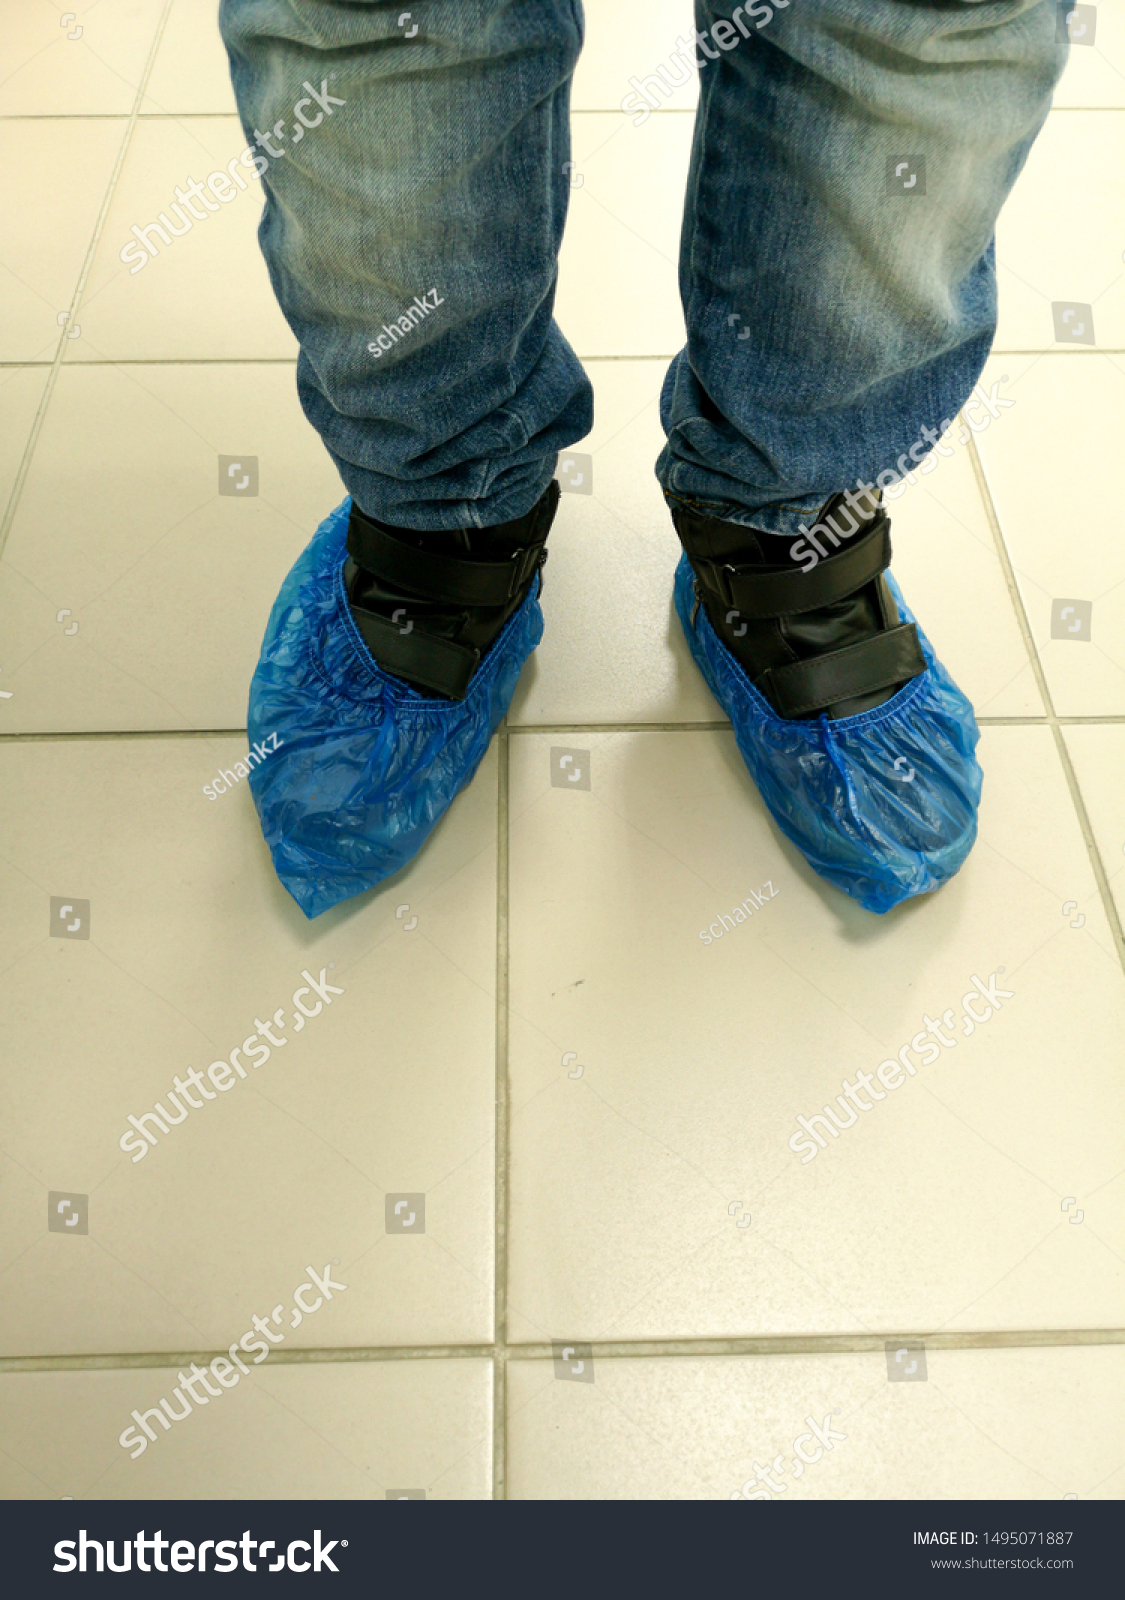 shoe covers in hospital